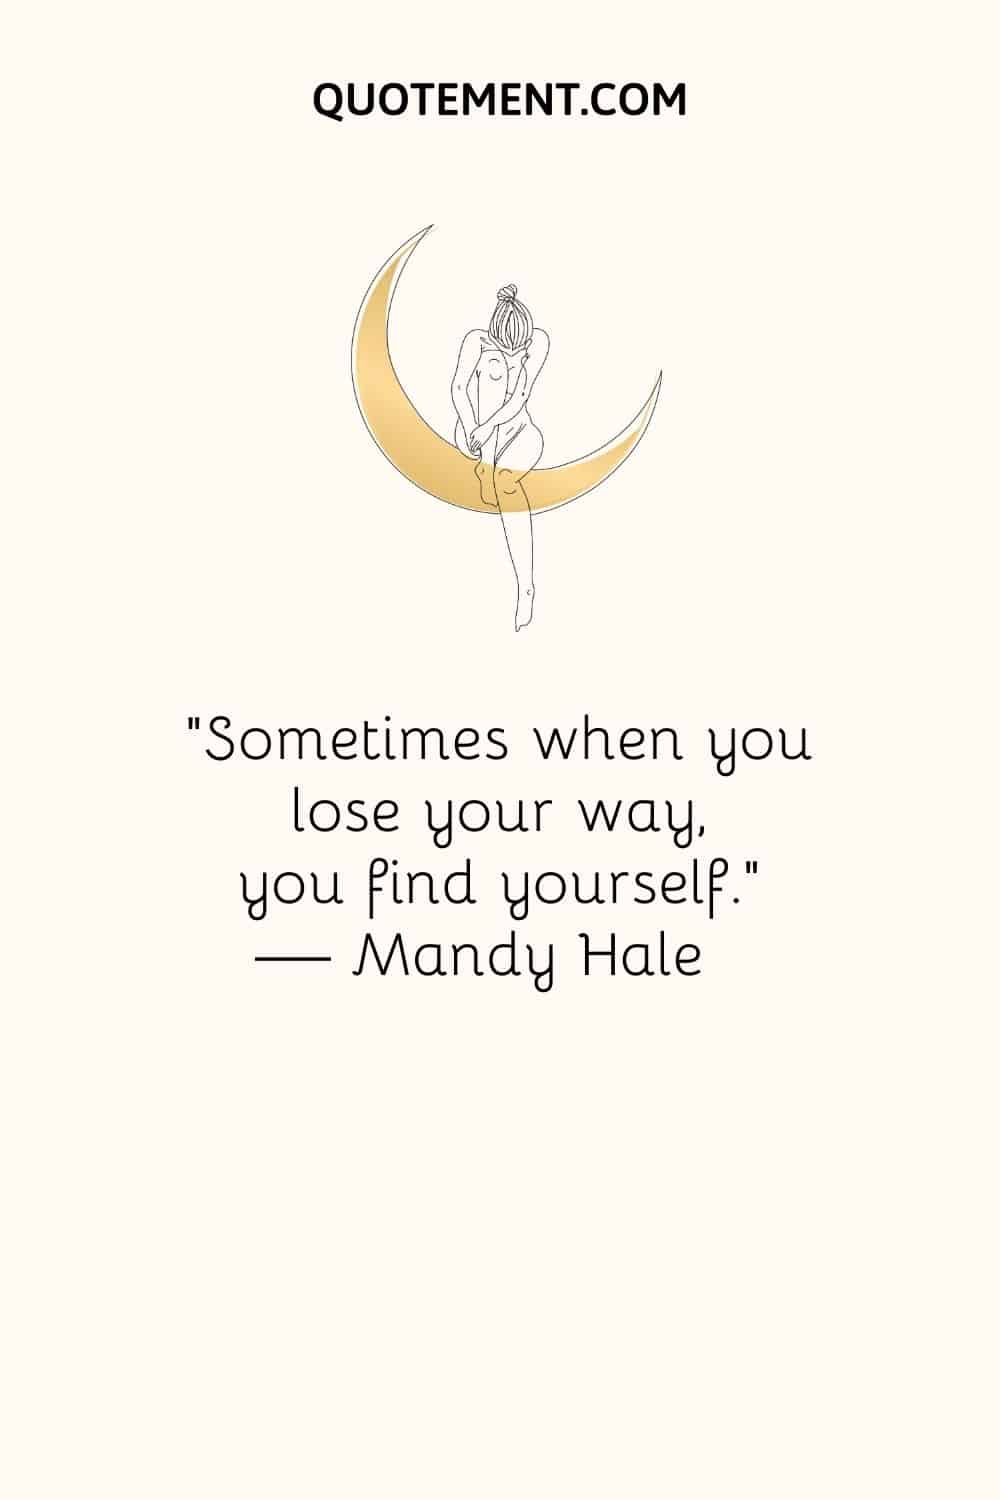 illustration of a girl sitting on the moon representing finding your way quote